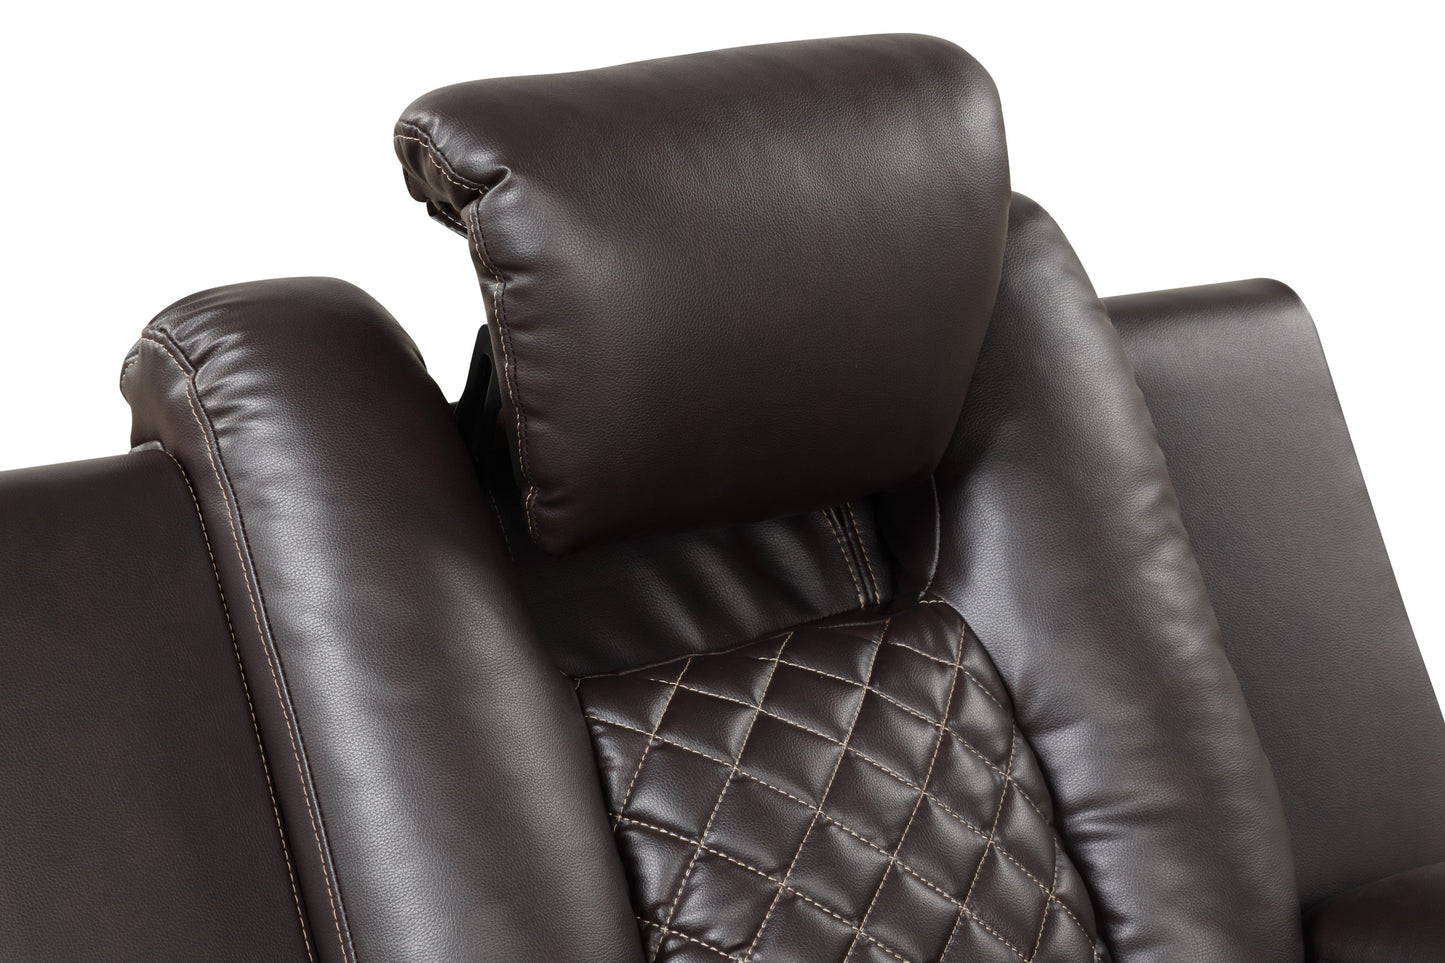 Benz LED & Power Recliner Chair Made With Faux Leather in Brown